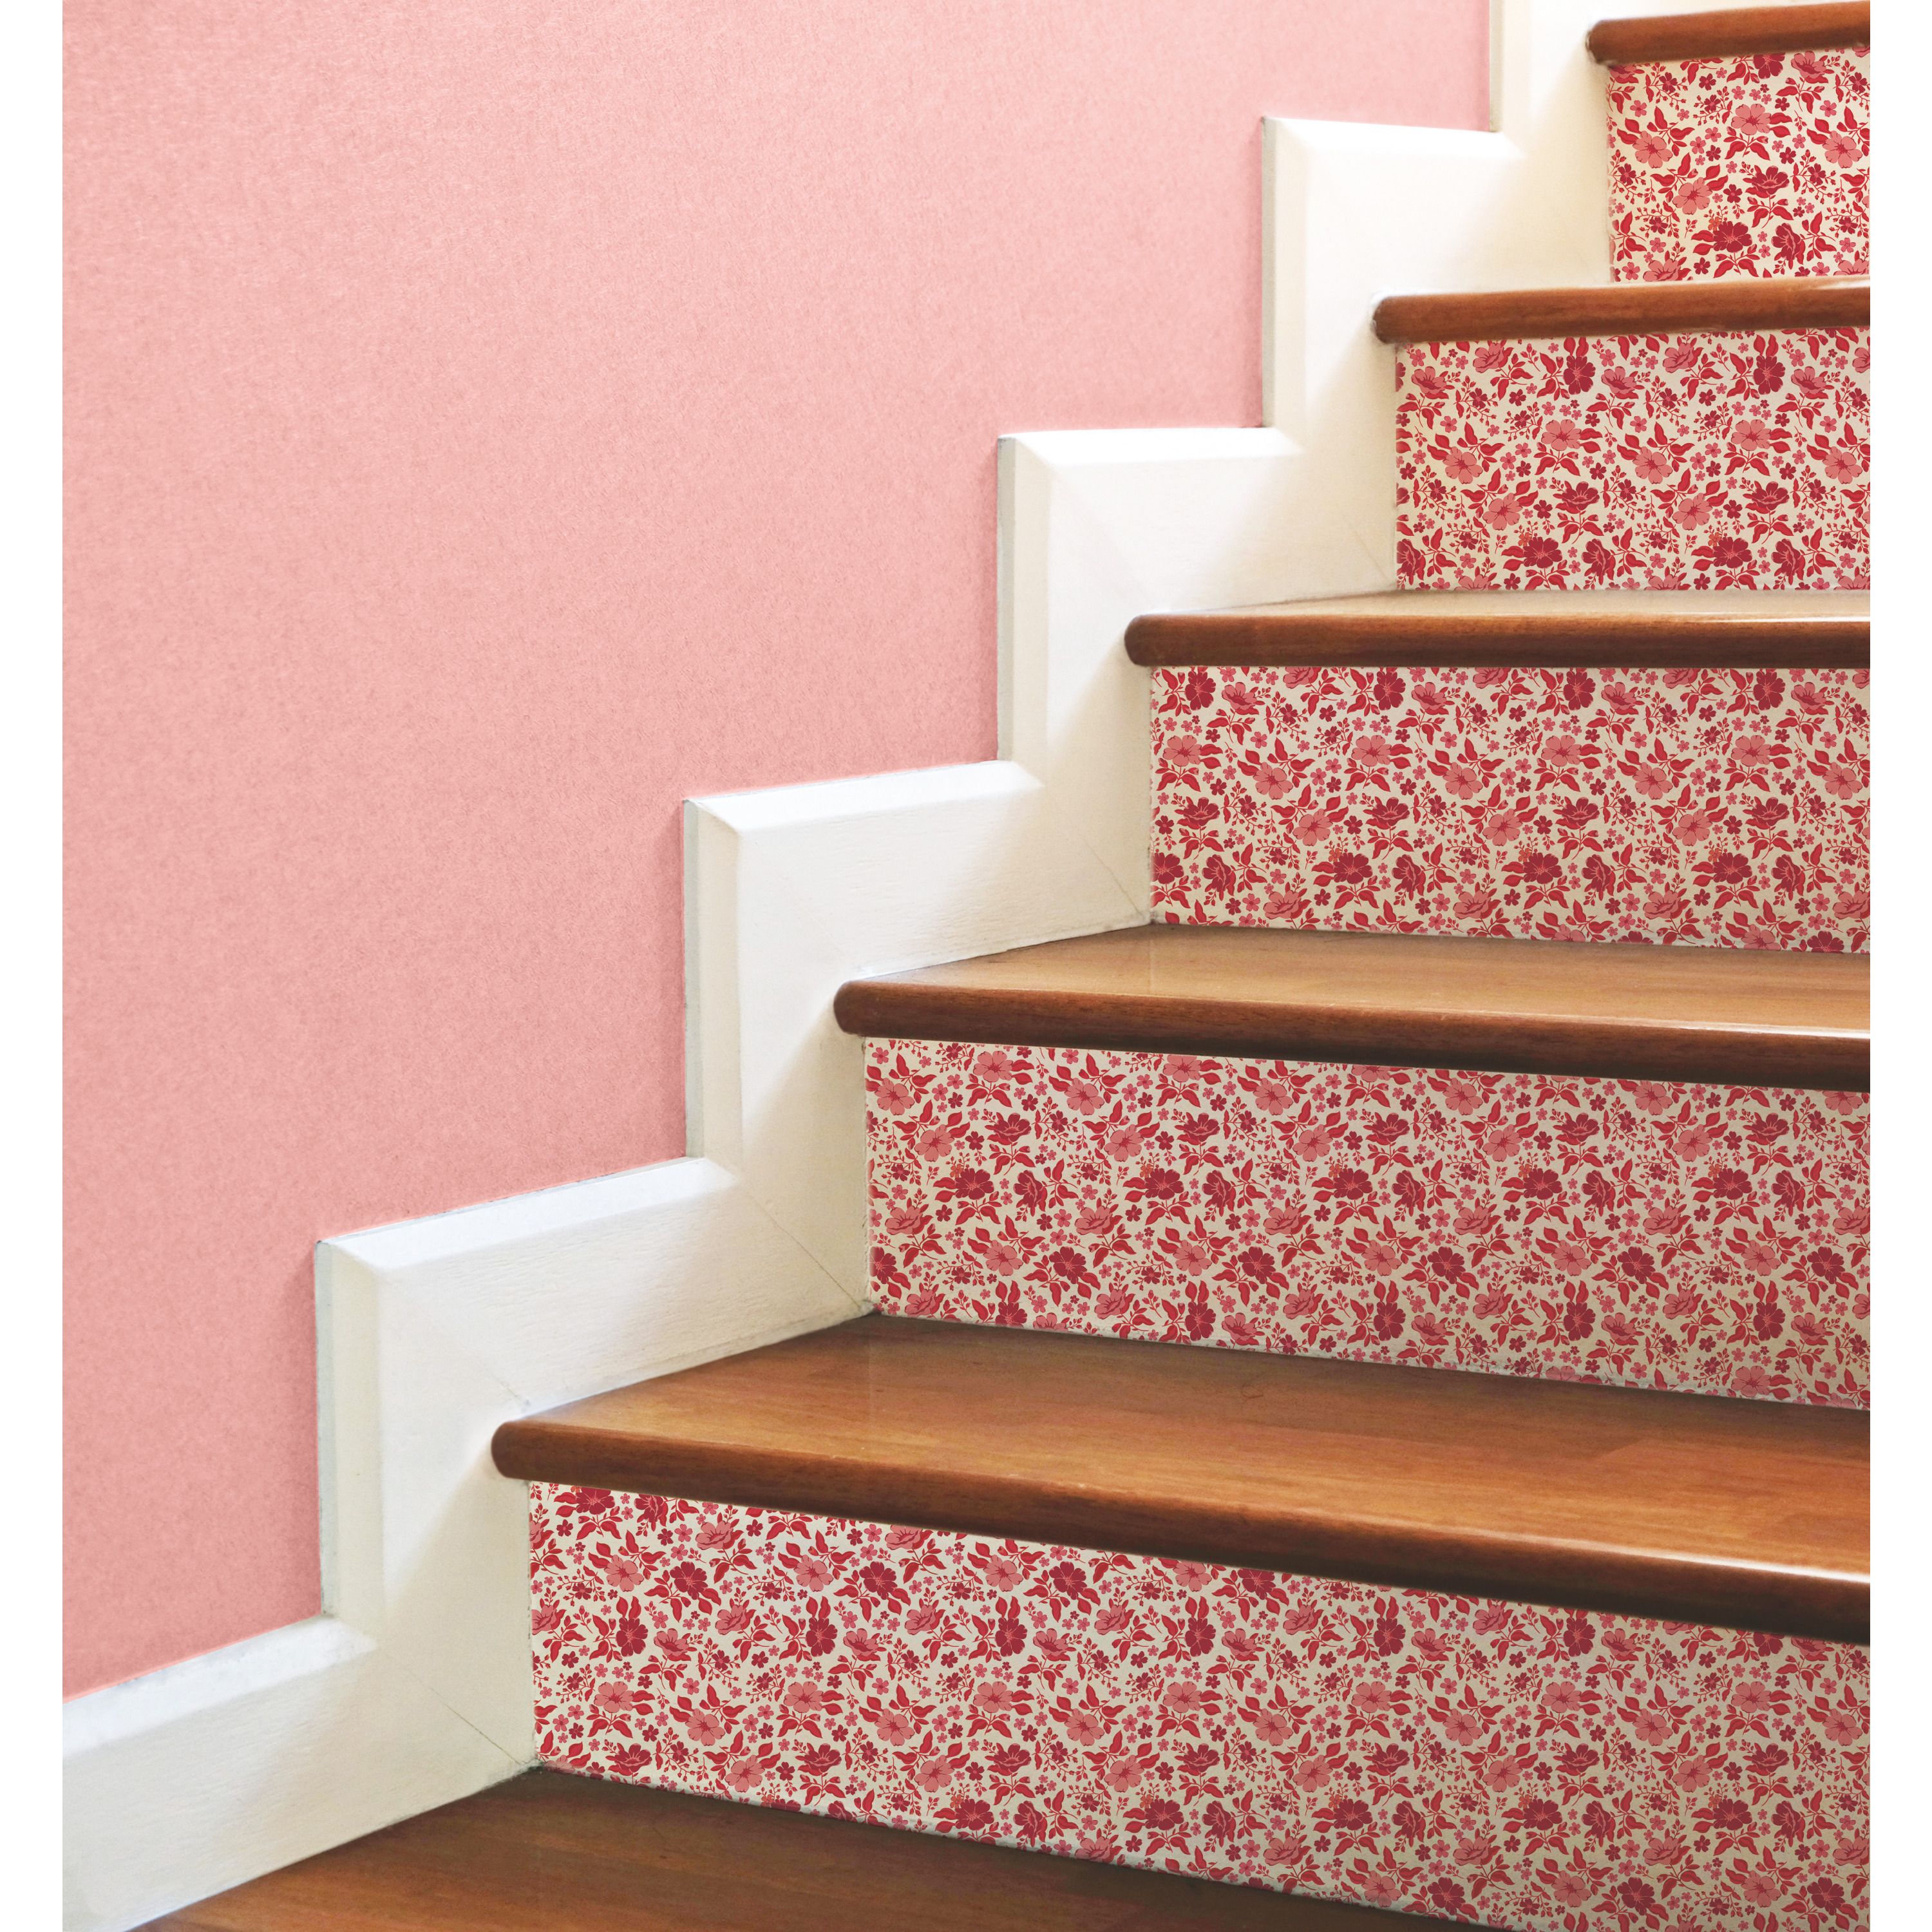 Pioneer Woman has a peel and stick wallpaper line